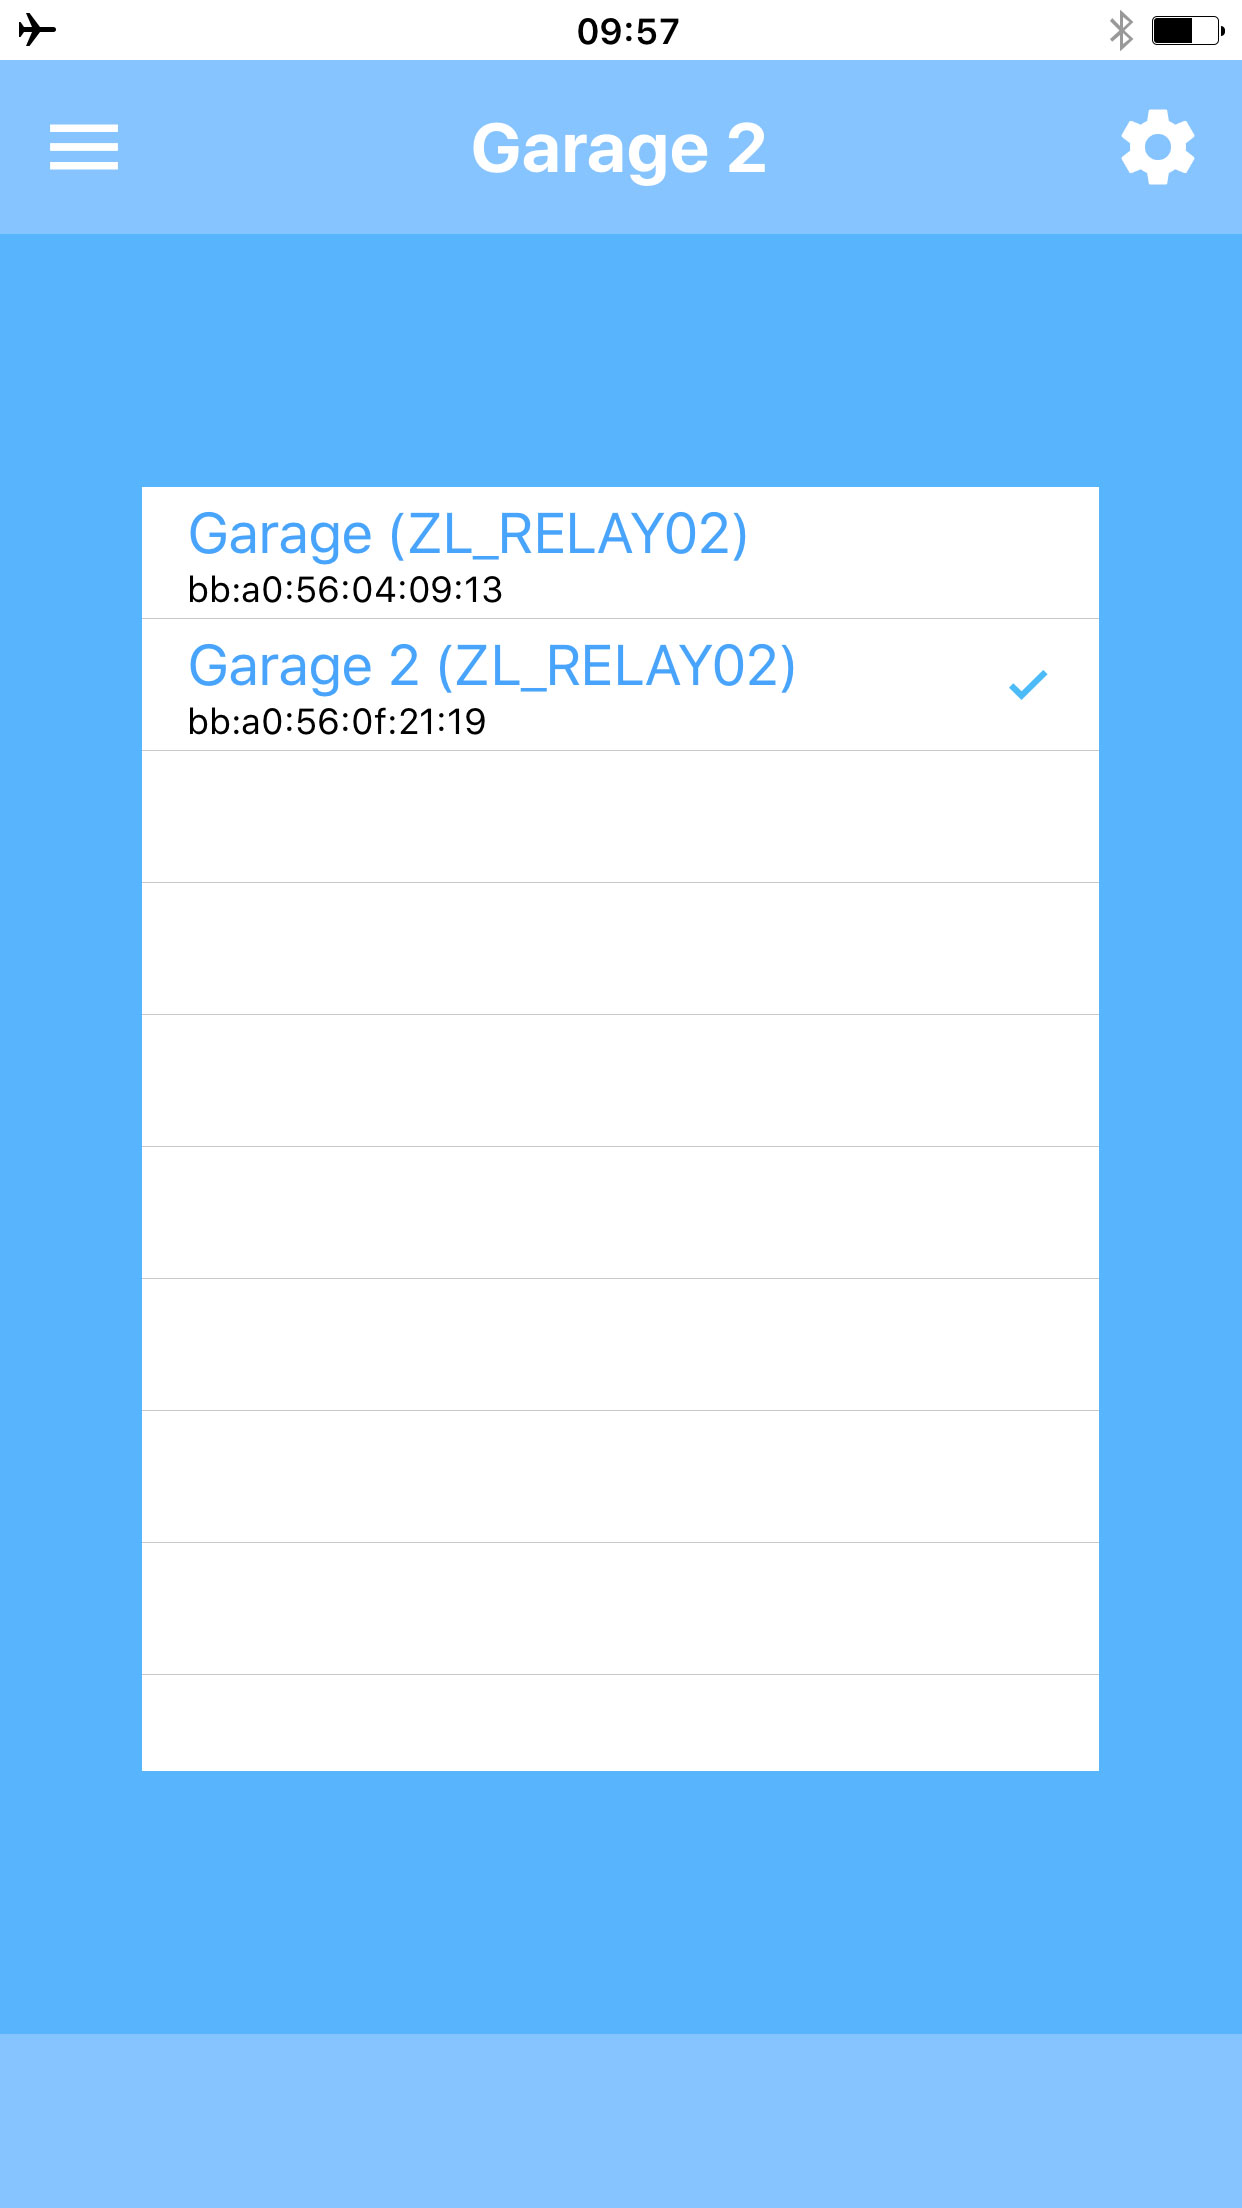 Select a device to open a garage